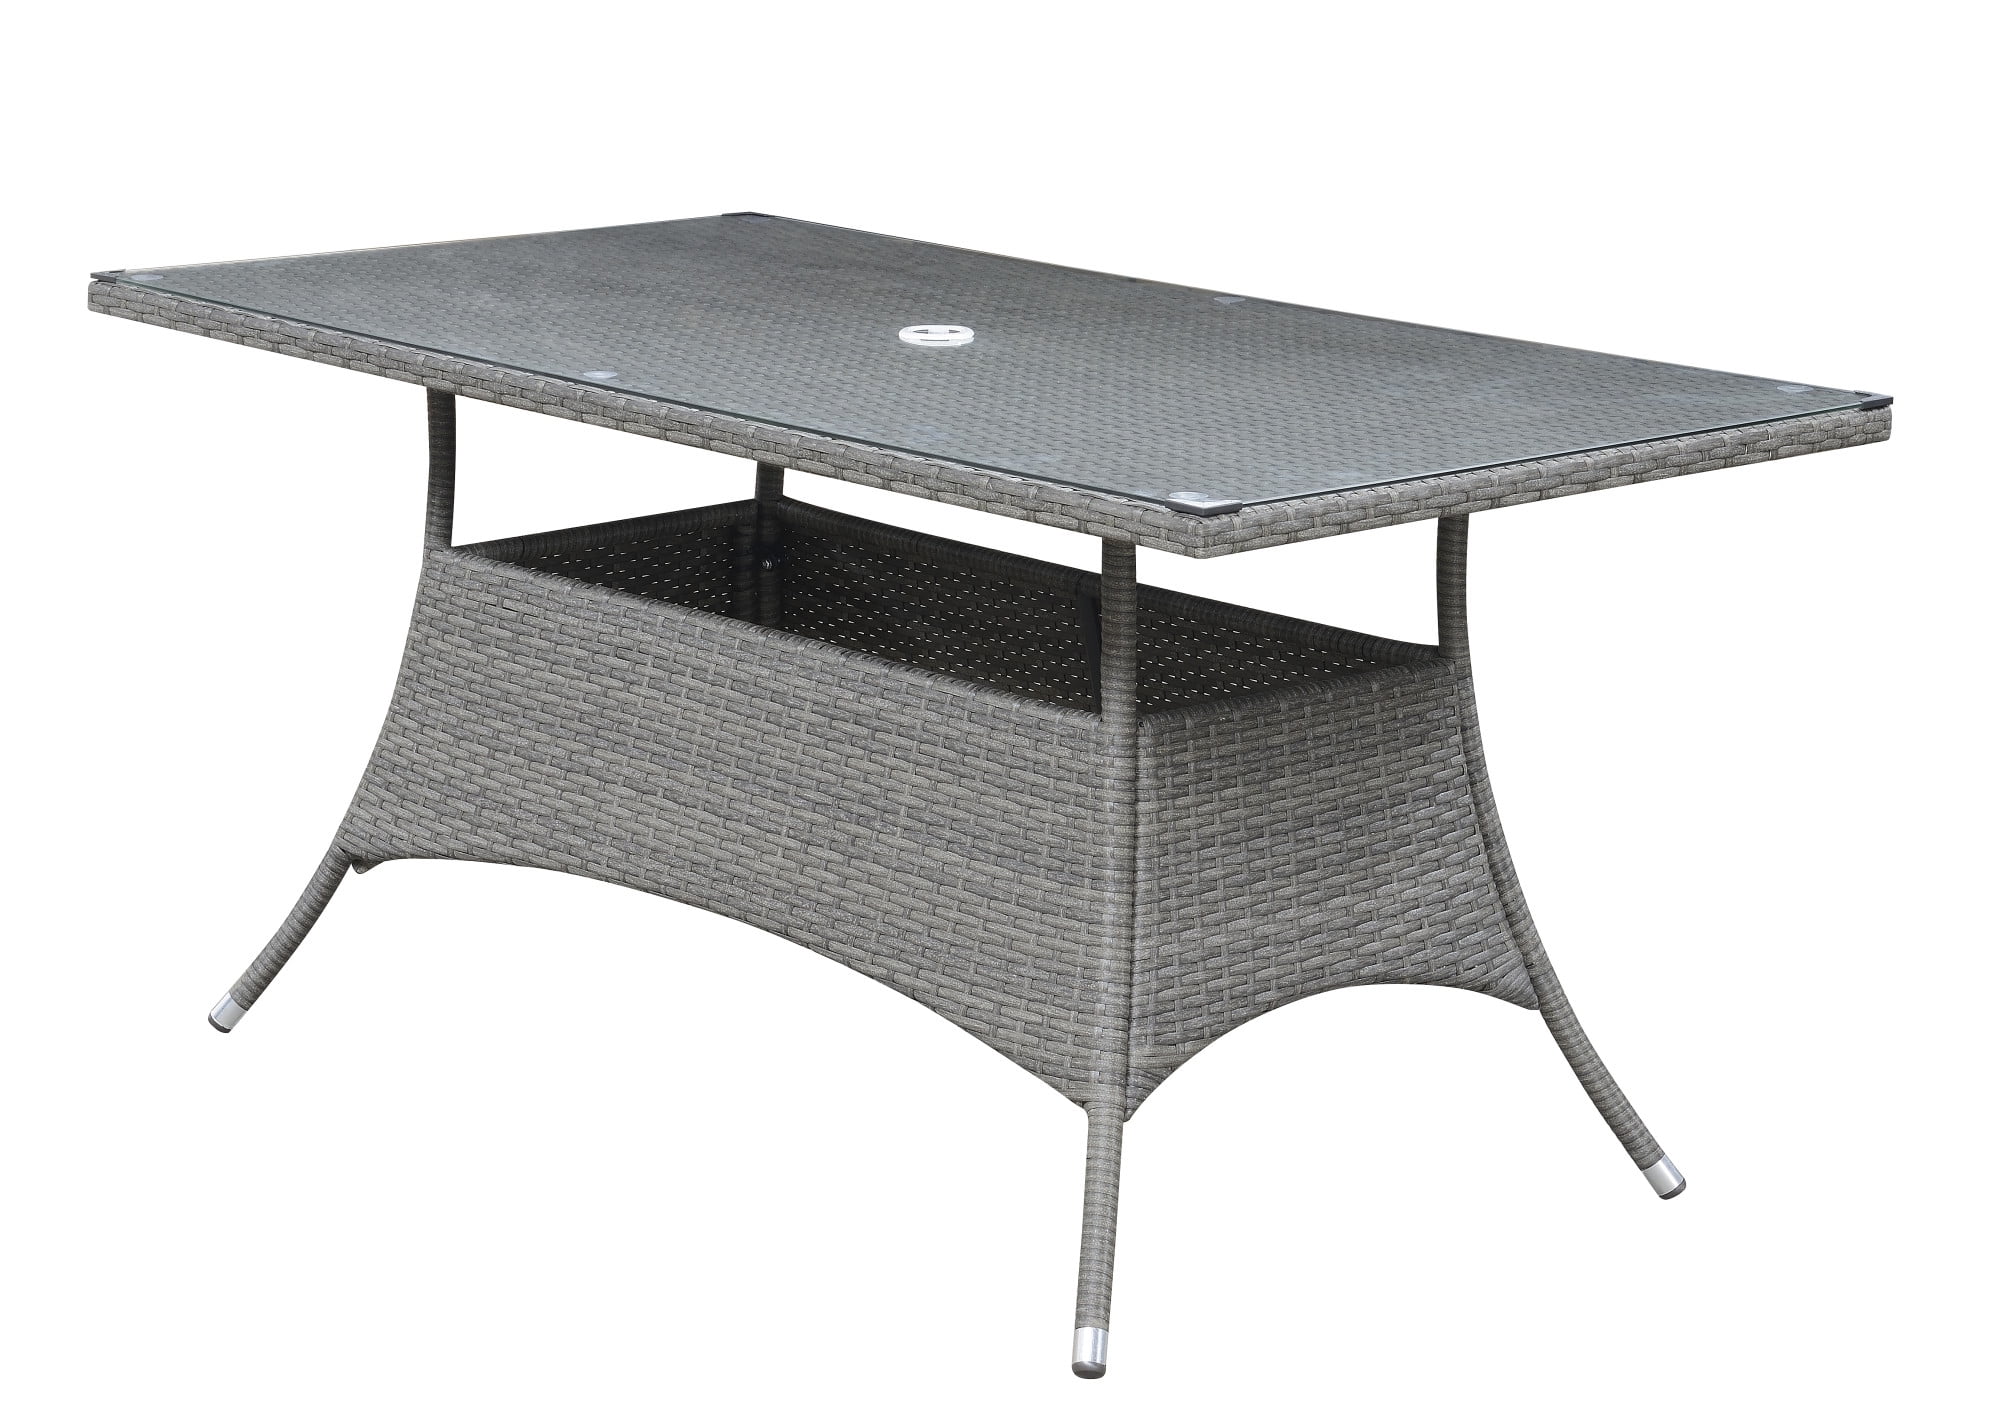 Emerald Home Ridgemonte Gray 59.1" Outdoor Dining Table with All